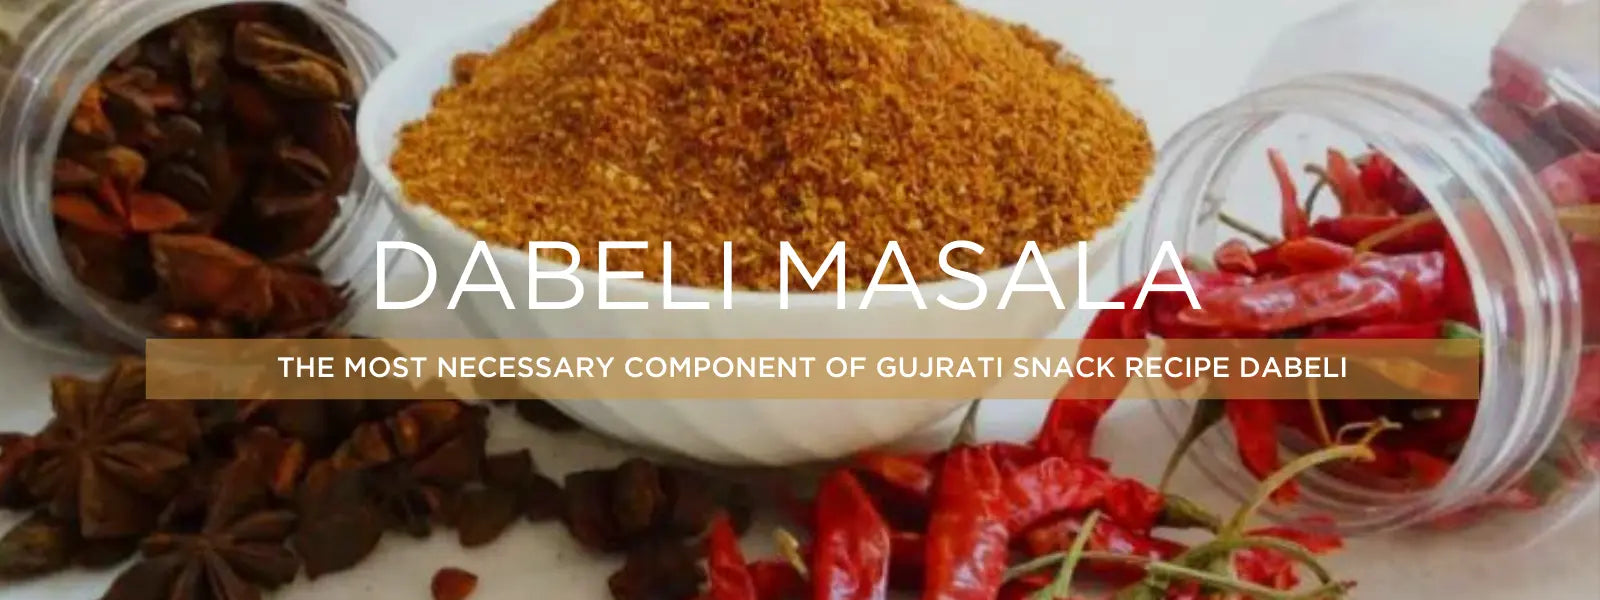 Dabeli Masala - Health Benefits, Uses and Important Facts